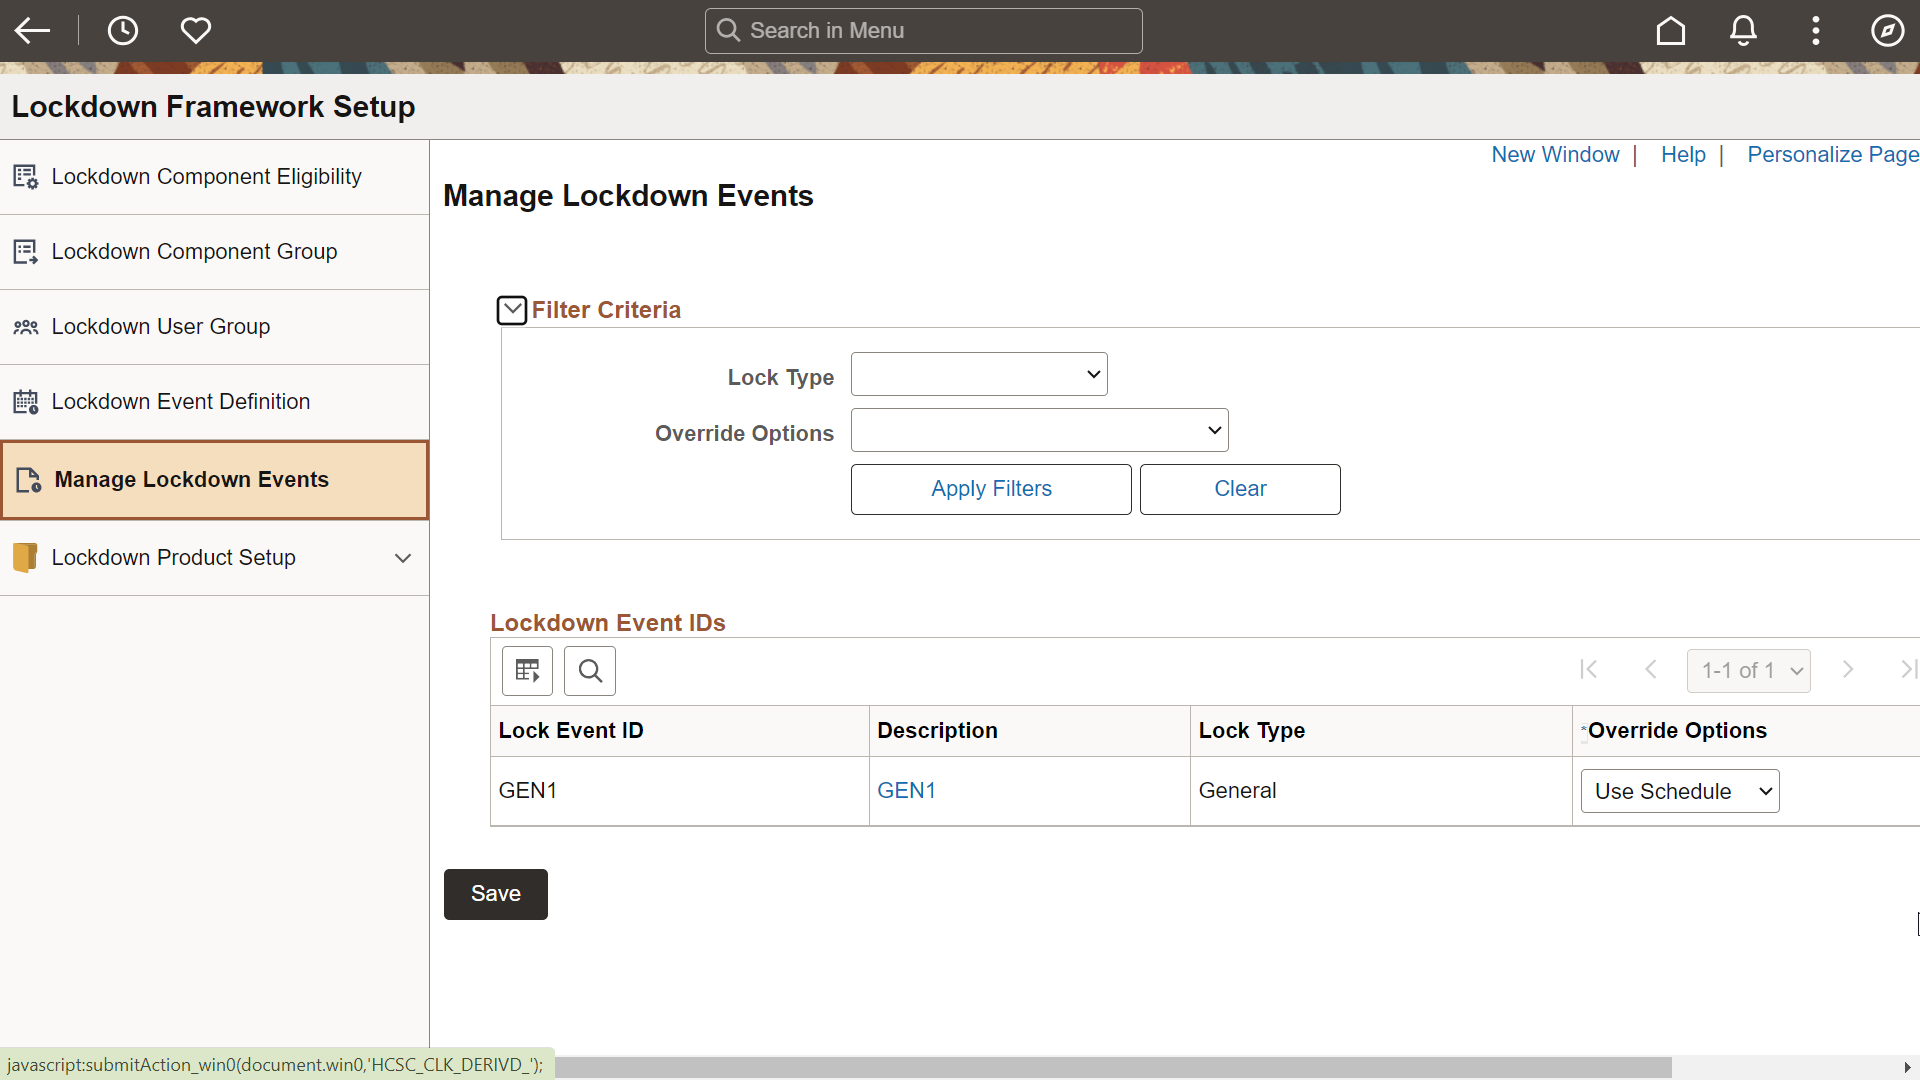 Manage Lockdown Events